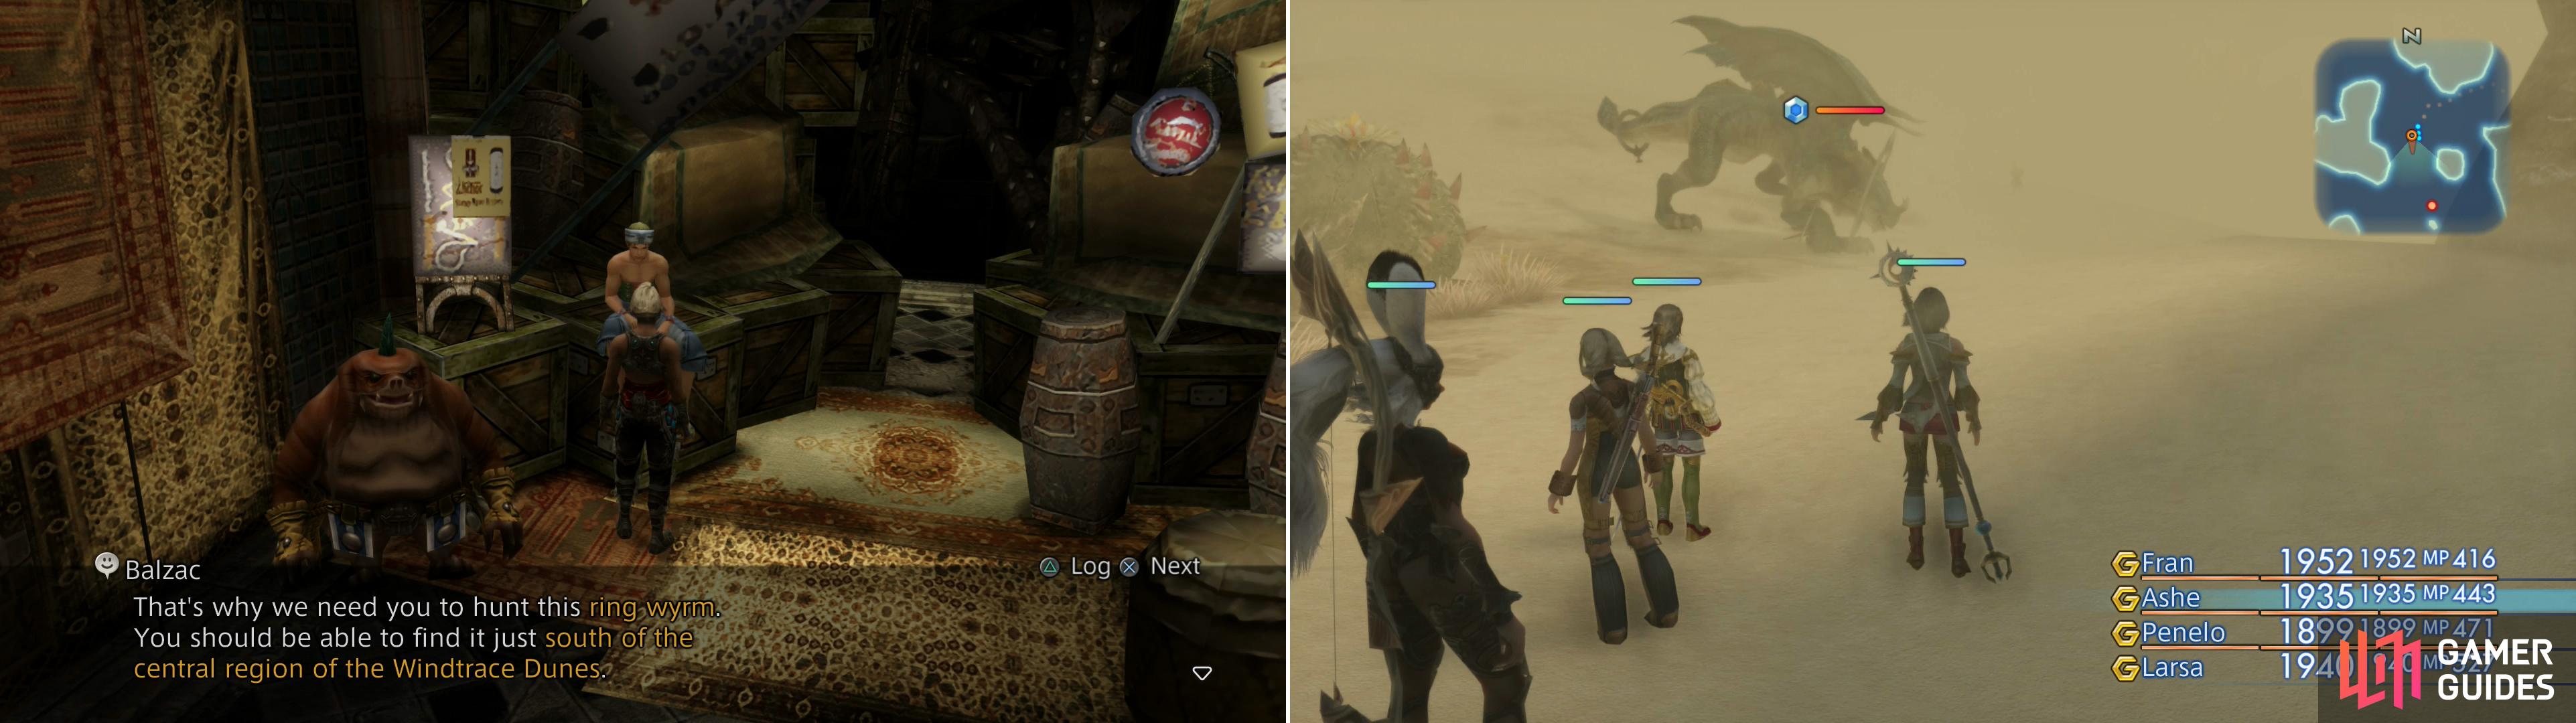 Speak to Balzac in Lowtown to learn about his Mark, the Ring Wyrm (left). You’ll find Ring Wyrm in the Windtrace Dunes zone, as long as there’s a sandstorm active (right).